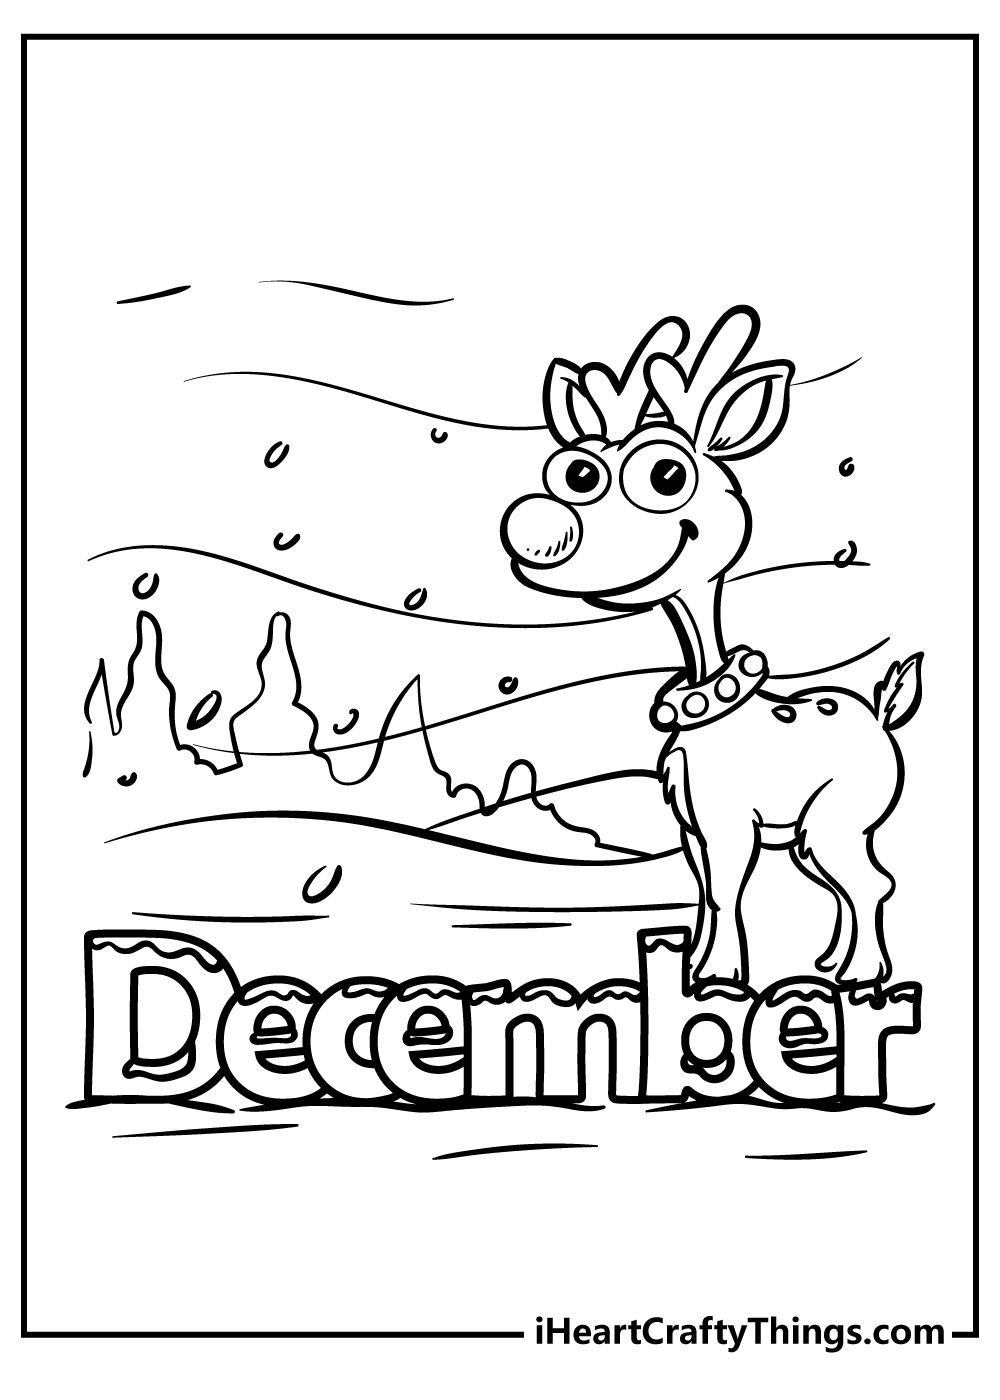 December Coloring Pages free pdf download